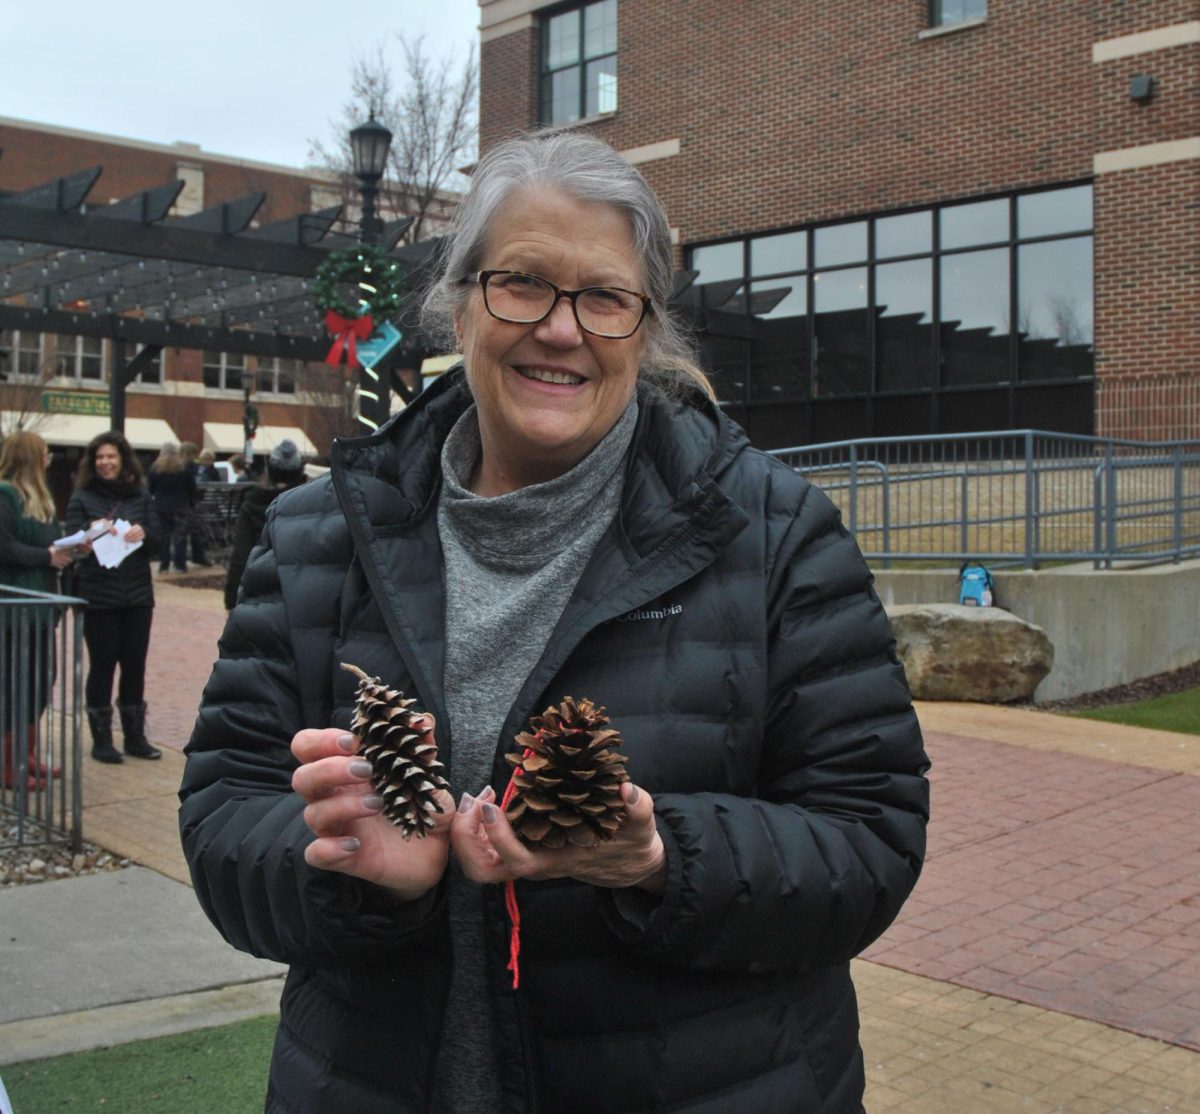 DeeAnn Pochedly a volunteer for Portage Parks, hands out pinecones for a craft during Kents Snow Day on Saturday, January 27th. 